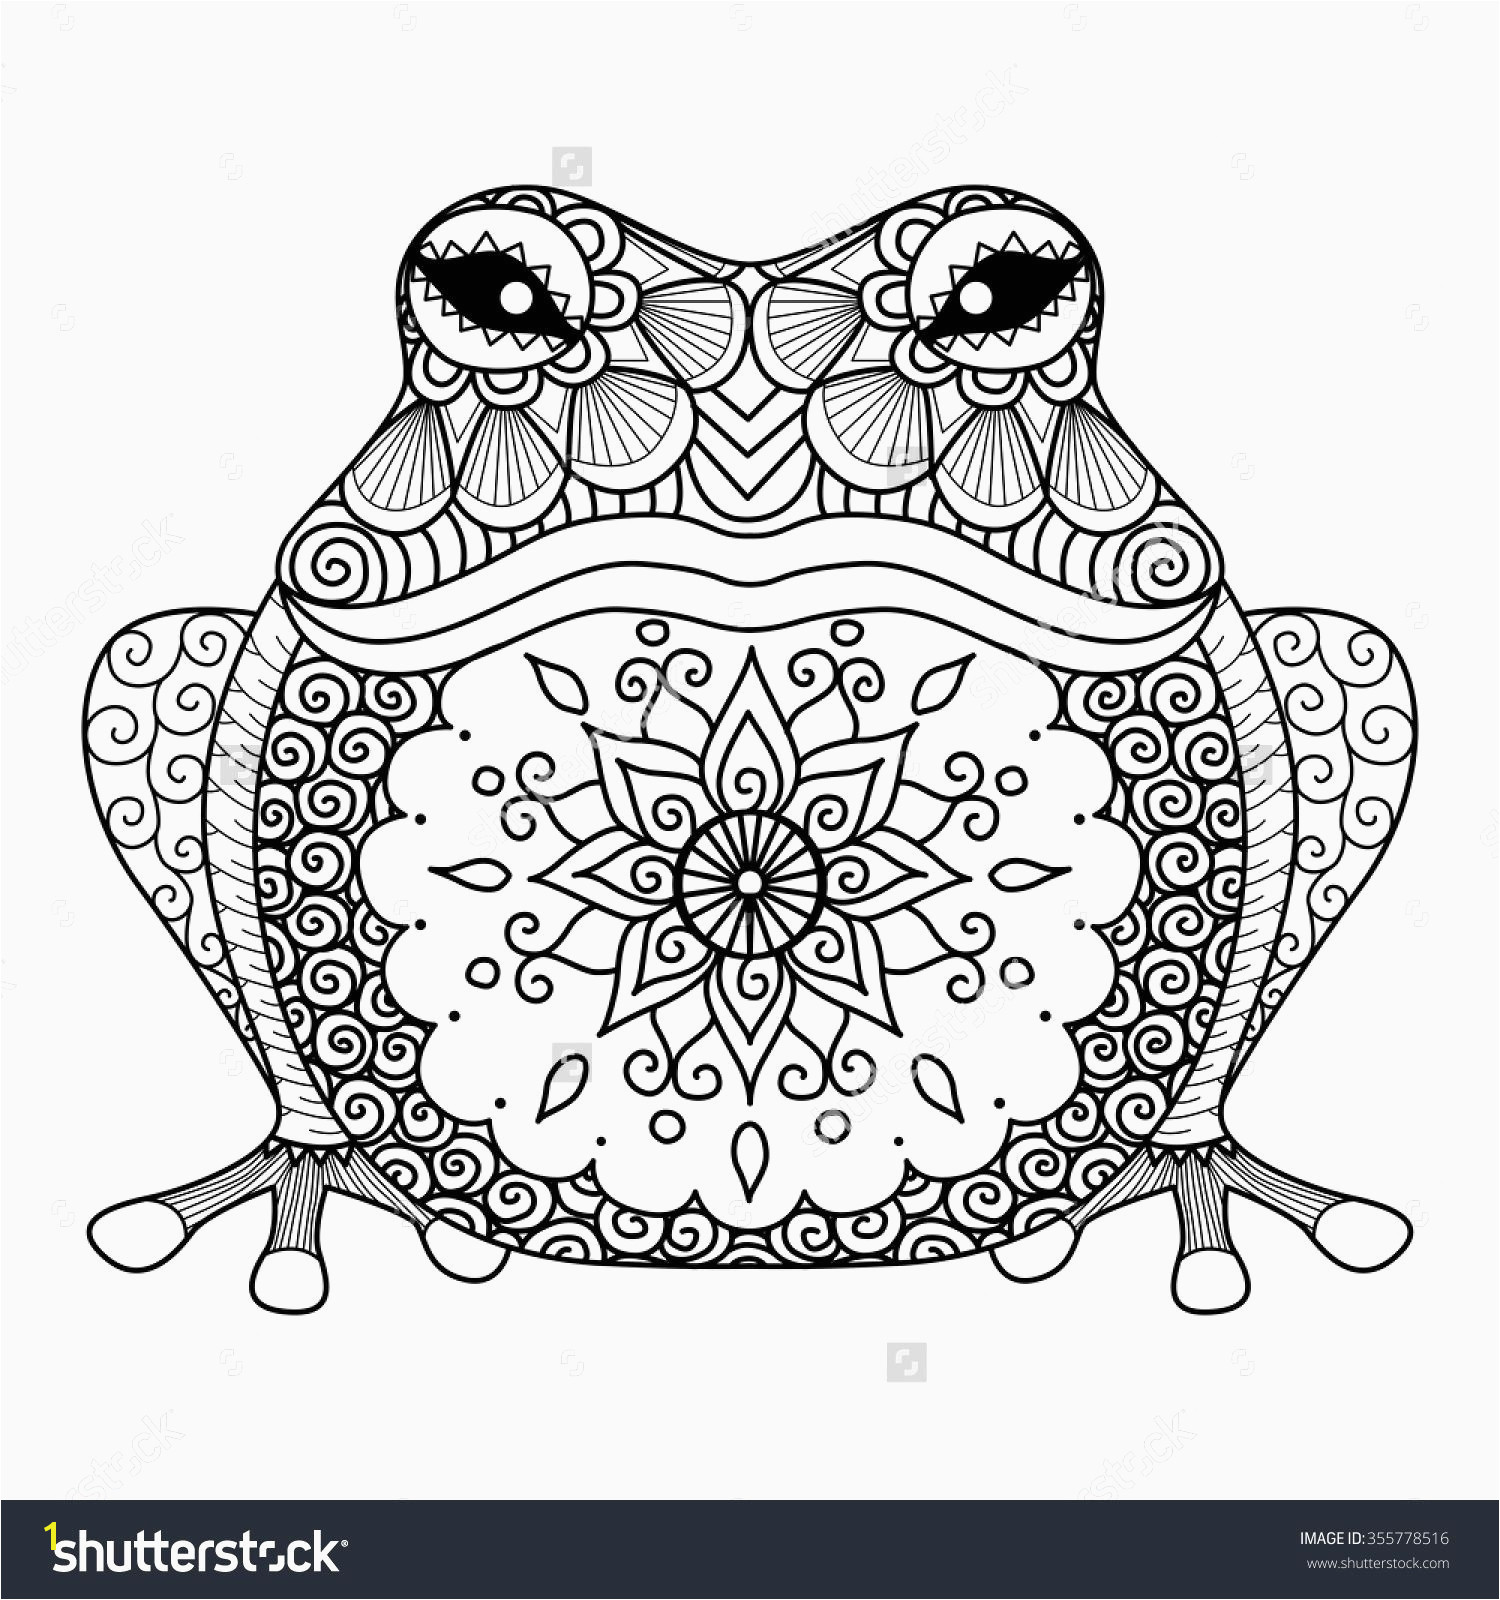 Free Animal Coloring Pages for Kids Frog Coloring Pages Elegant Frog Coloring Pages Fresh Frog